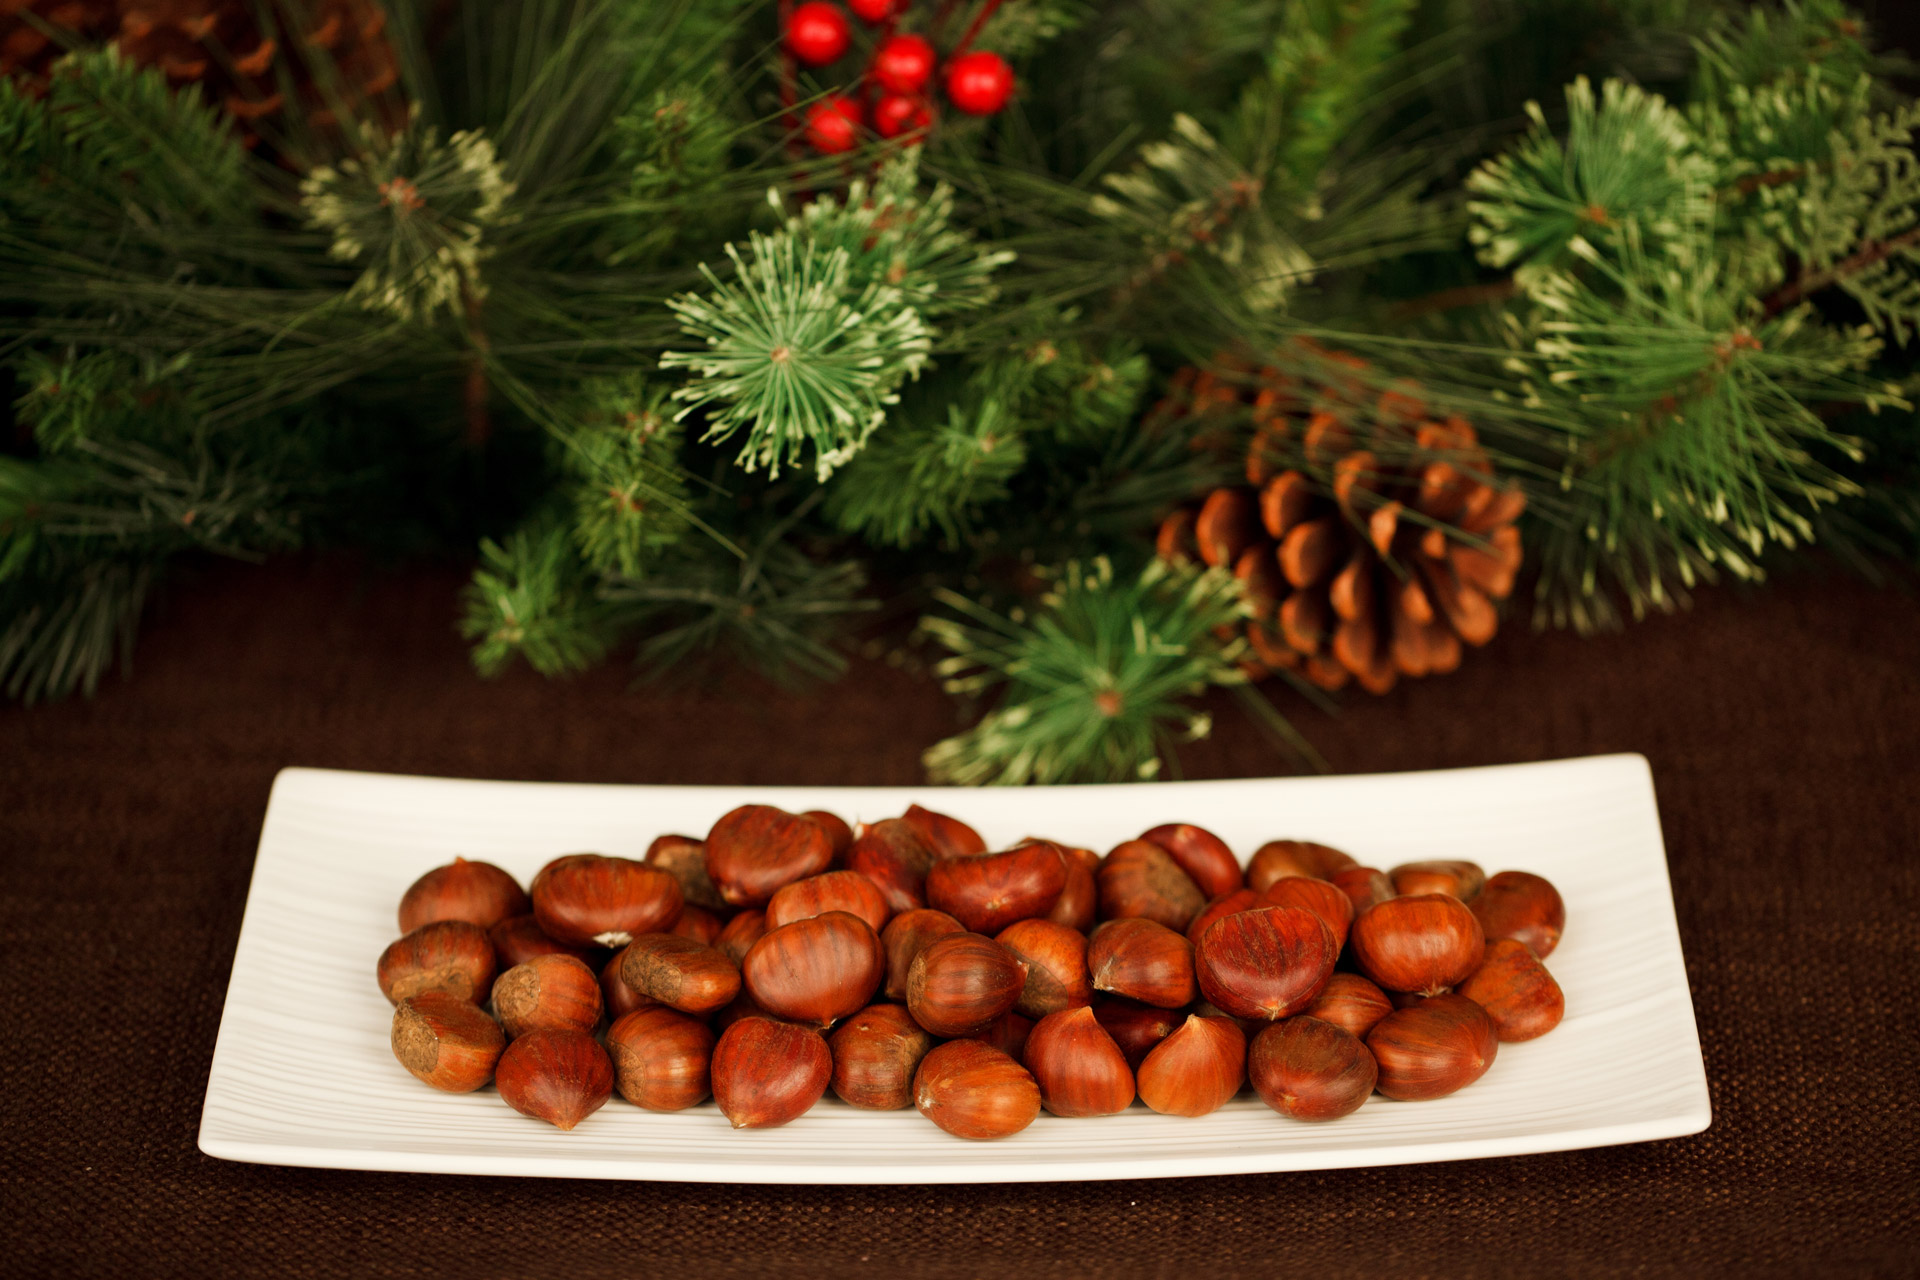 Chestnuts On A Plate